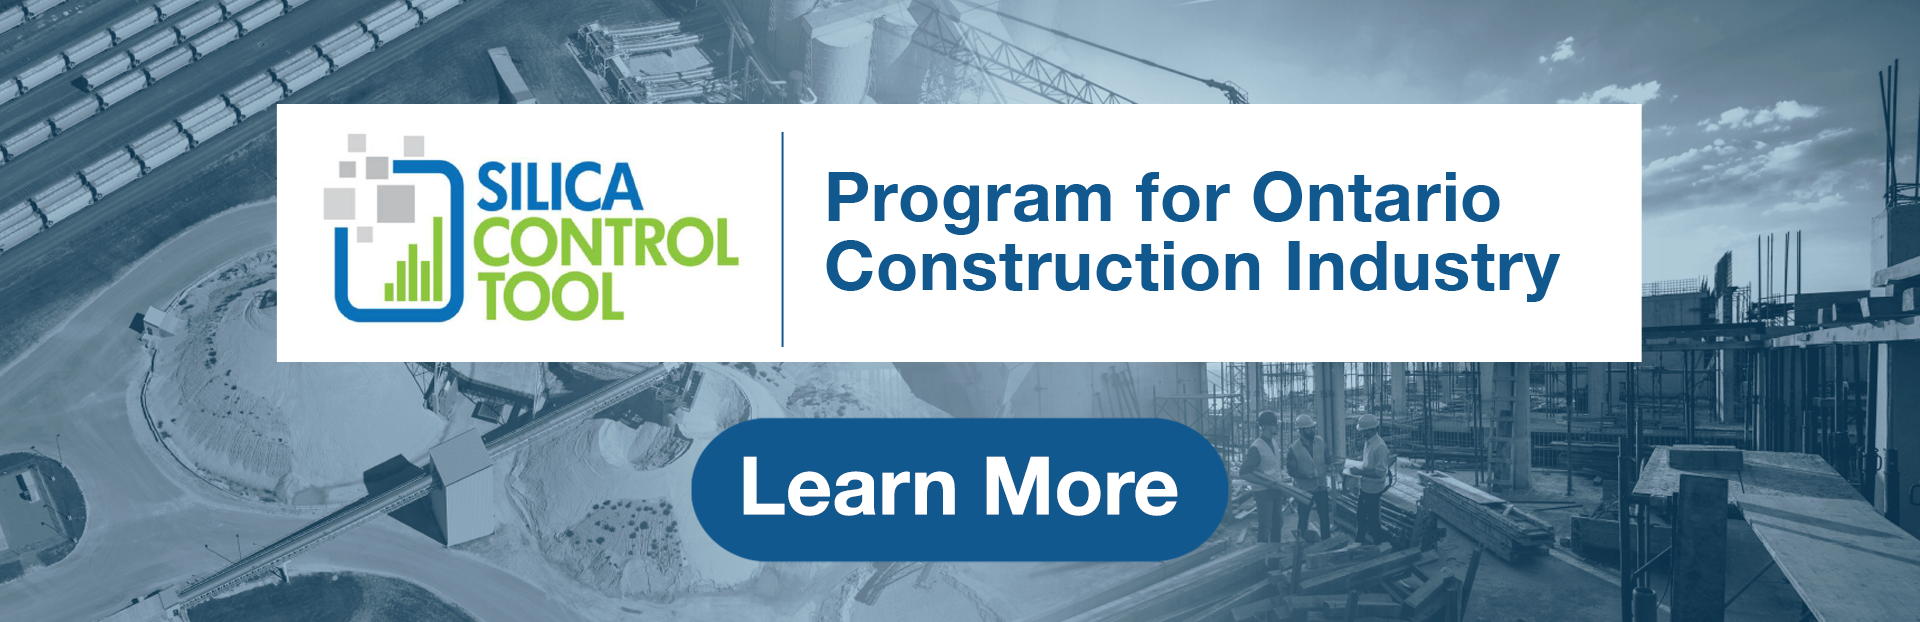 Pilot Program for Construction Industry | Now in Ontario | Apply Now